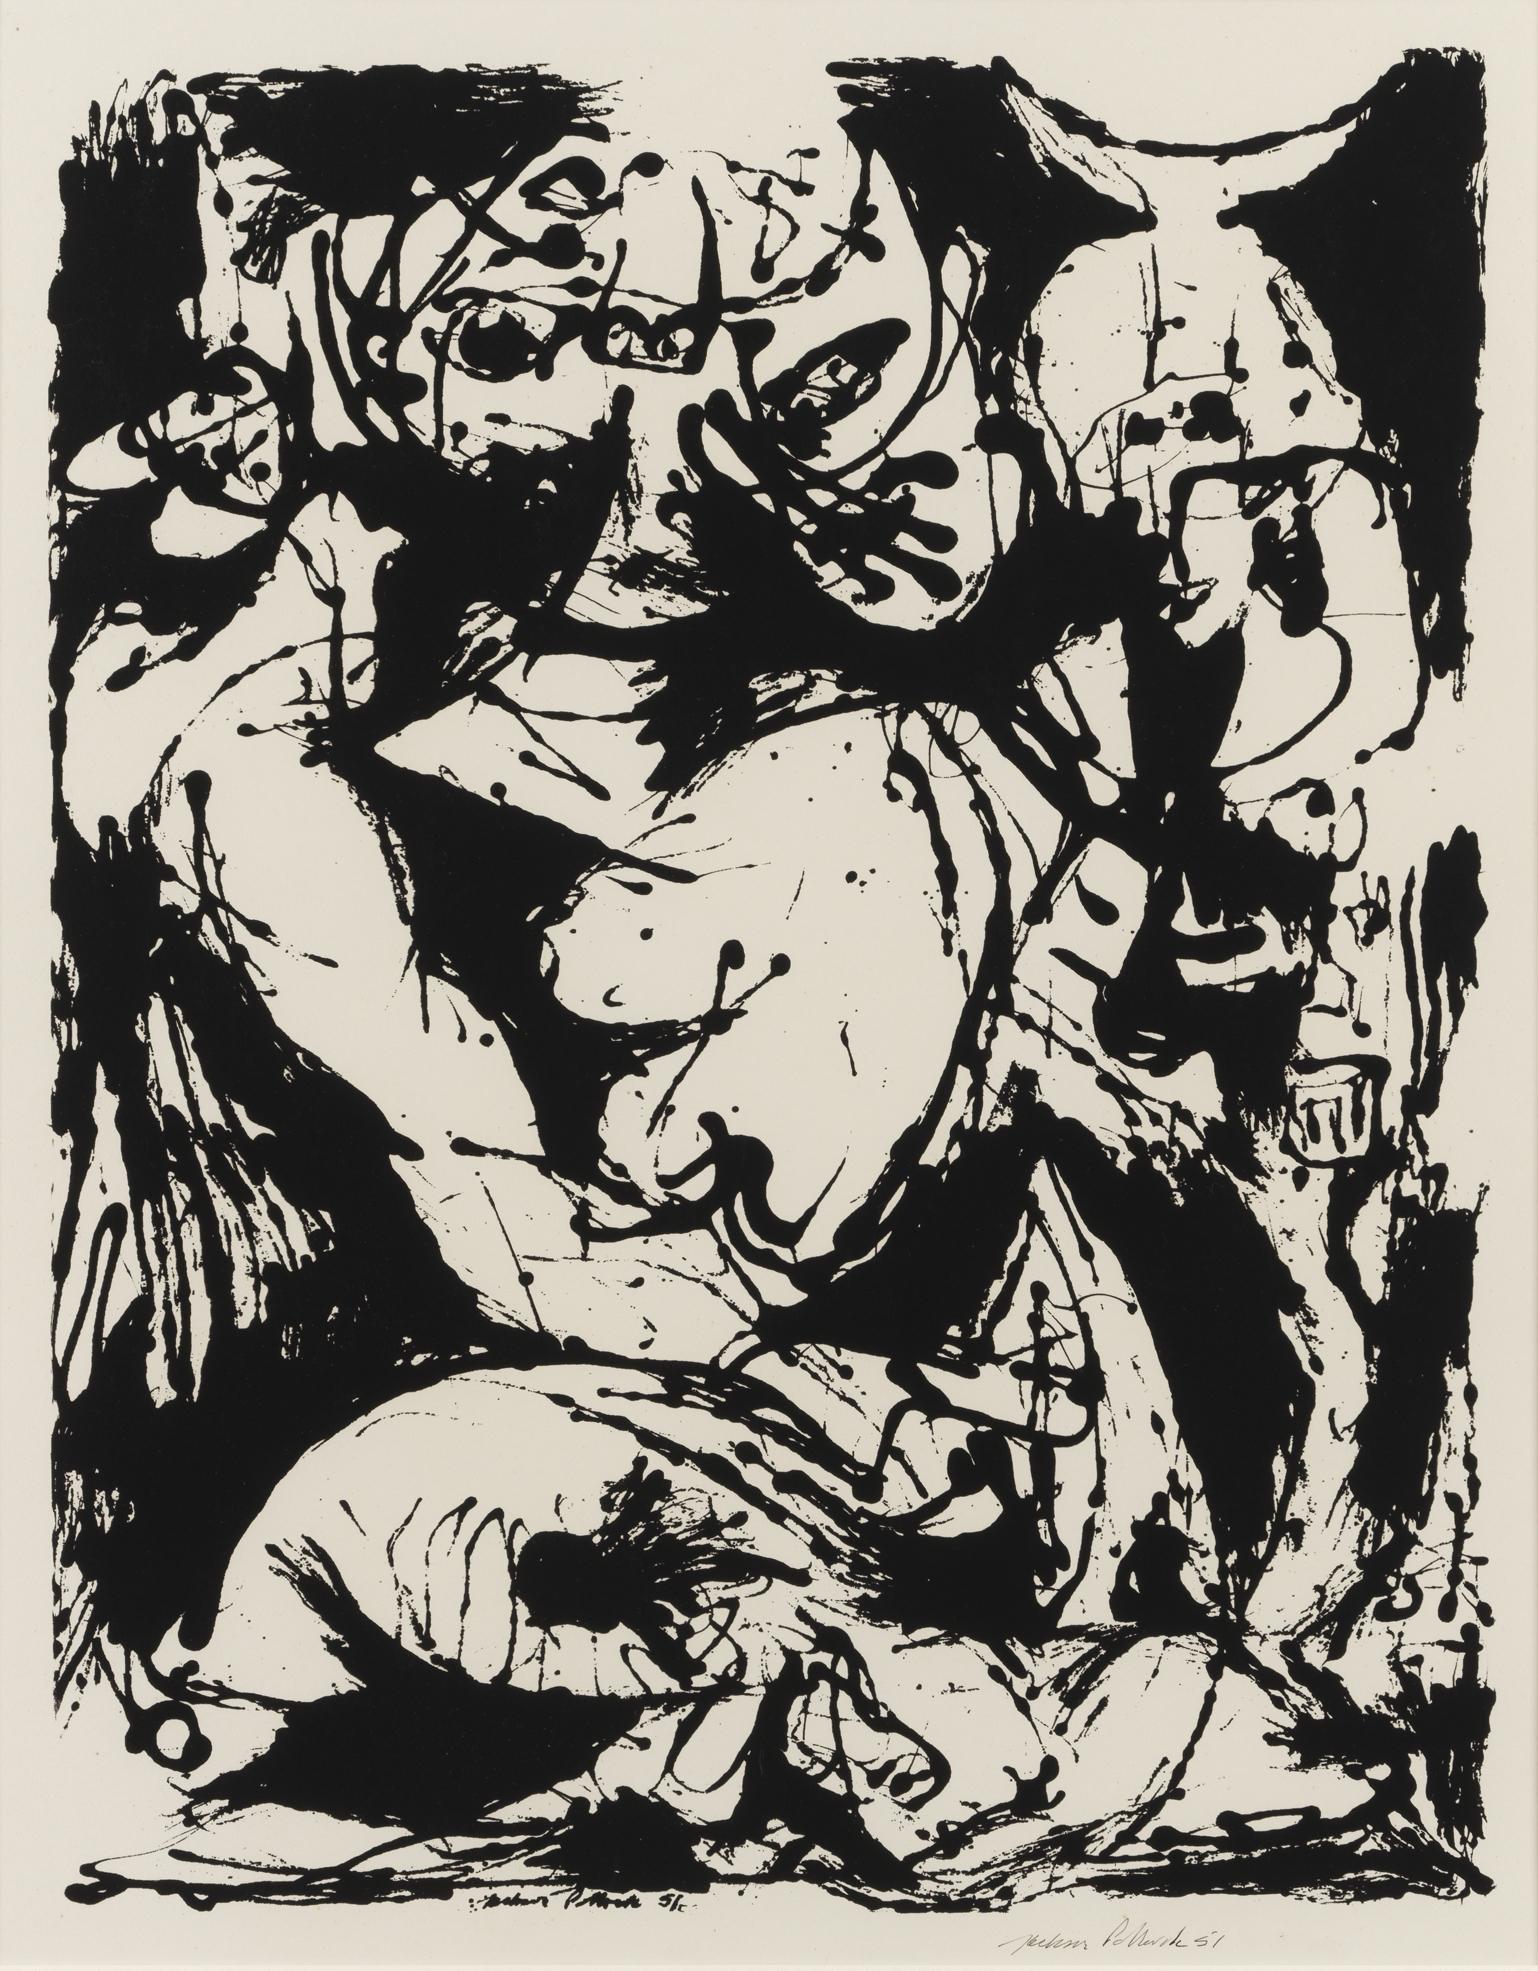 Where can I see Jackson Pollock paintings?